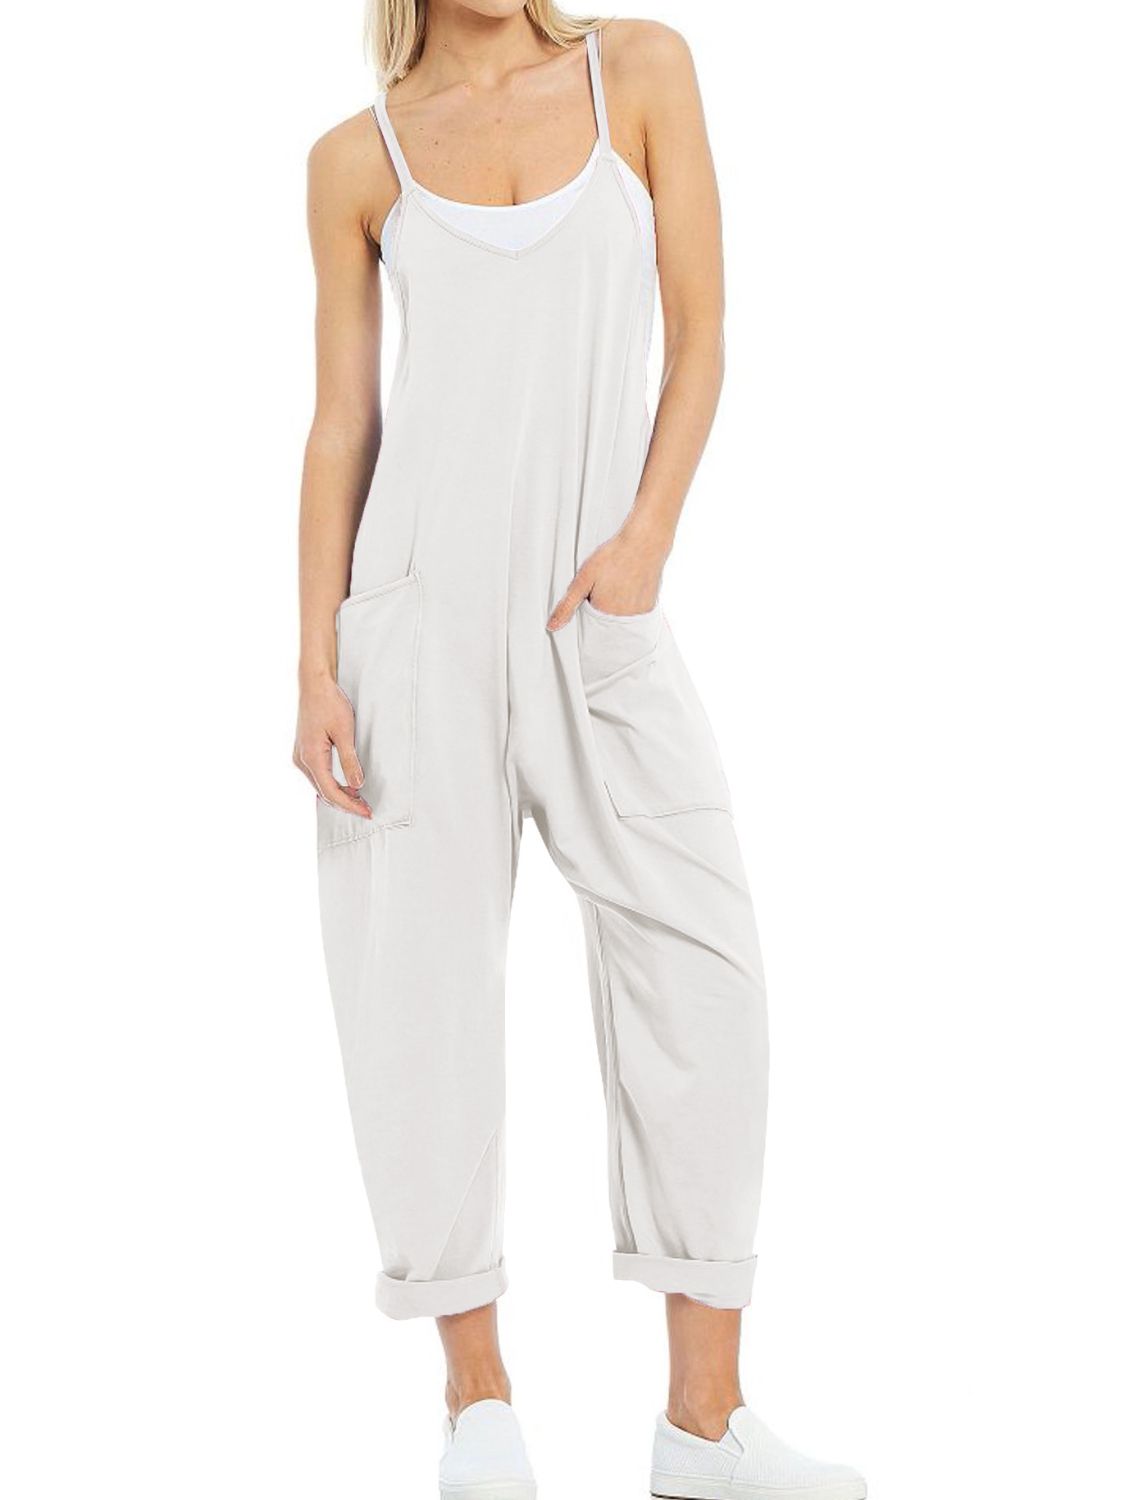 Spaghetti Strap Jumpsuit with Pockets - 7 Colors